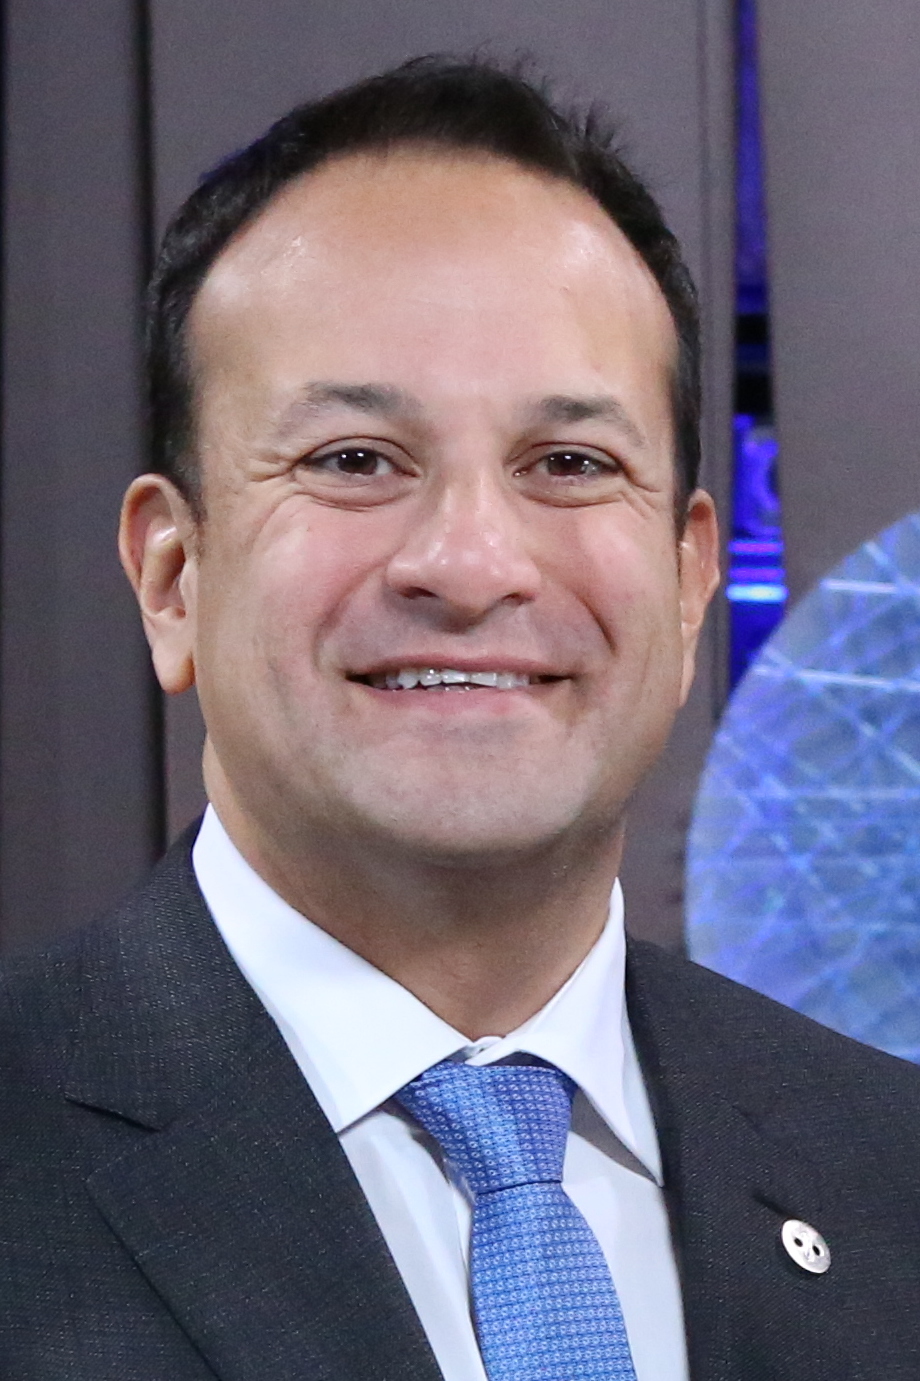 Ireland expects UK to extend Brexit grace periods - Varadkar